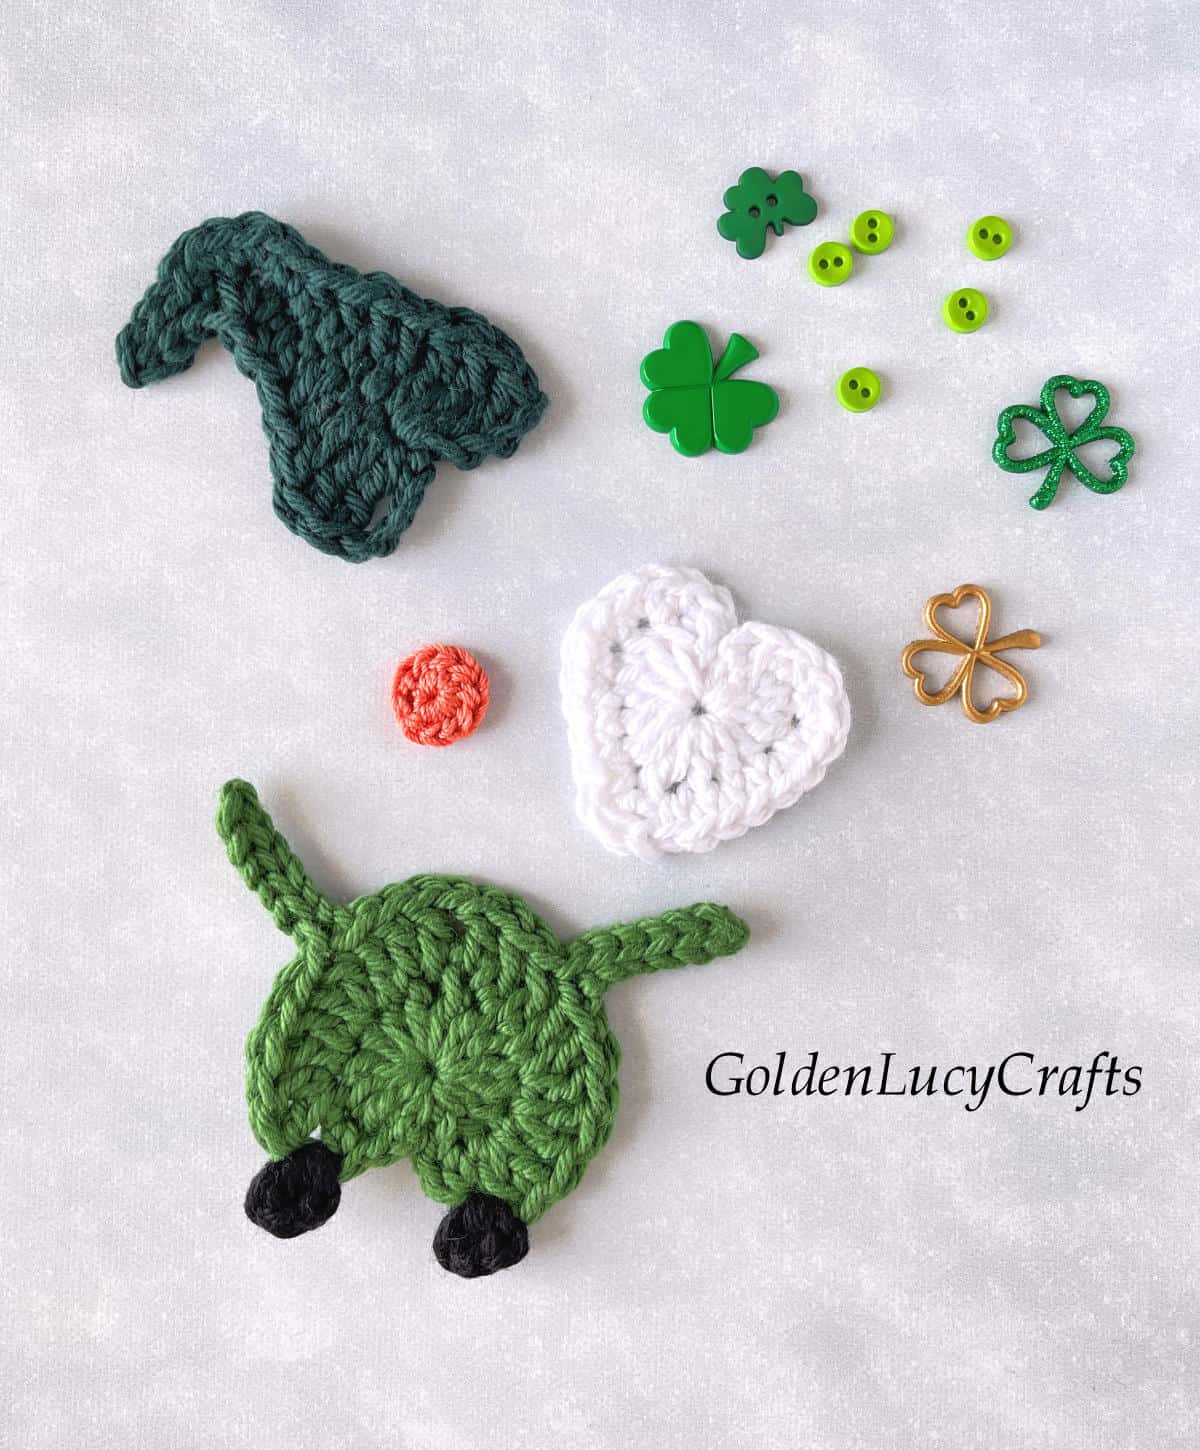 Parts of crocheted St Patrick's Day gnome applique.